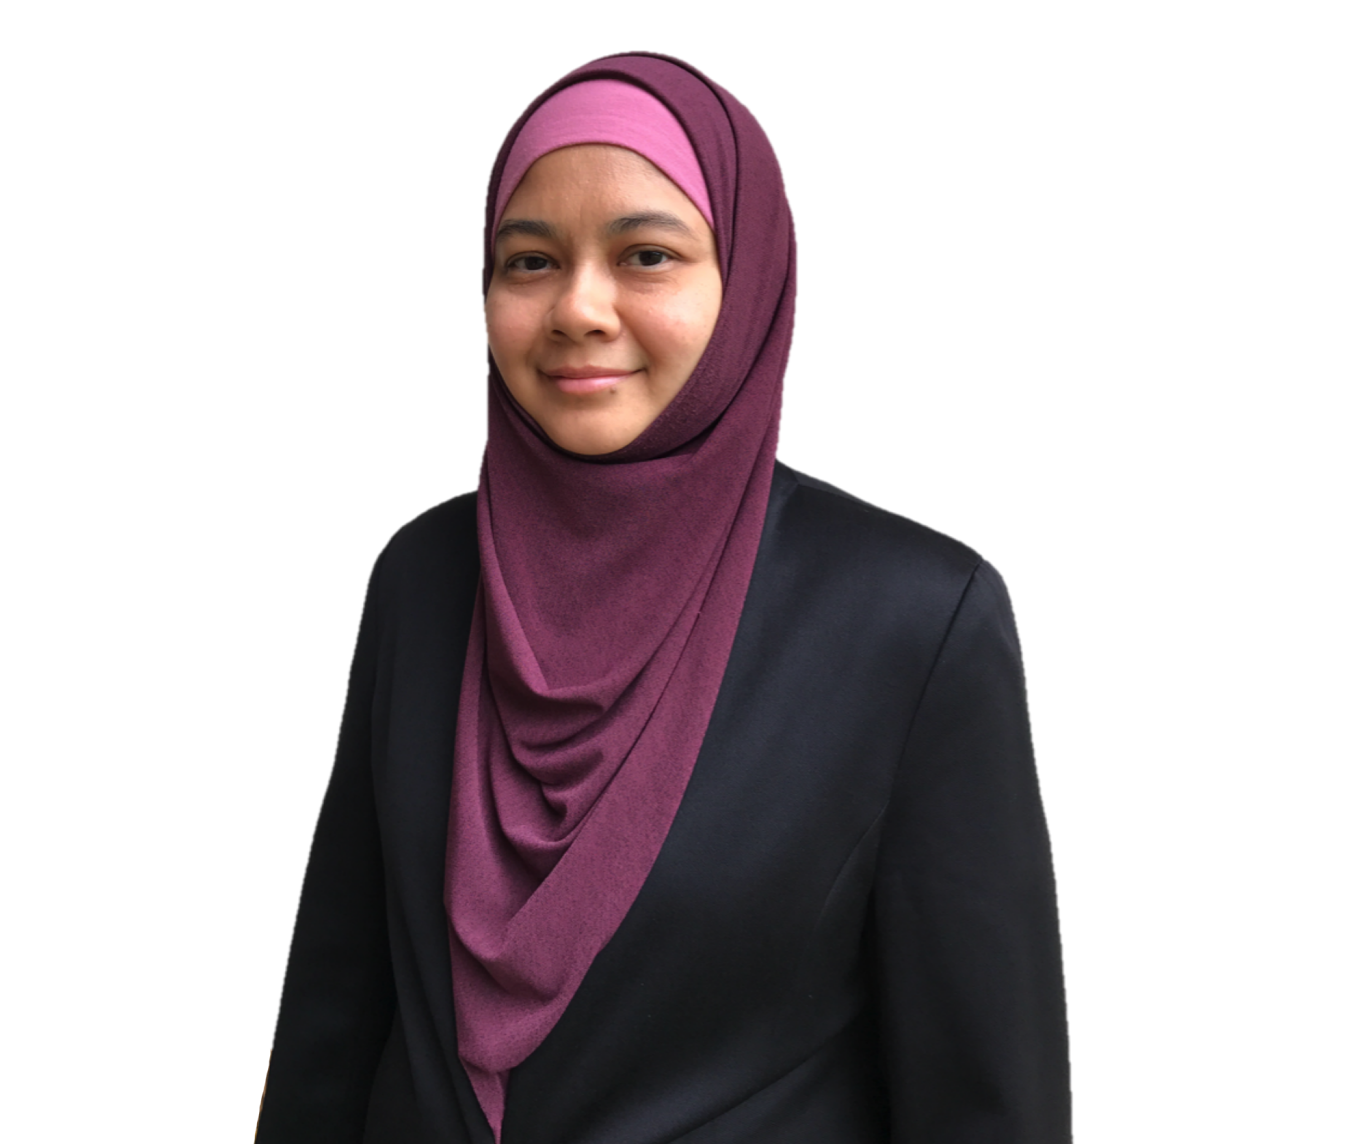 Azrina has been in the ICT/Network Security industry in Malaysia for over 20 years.